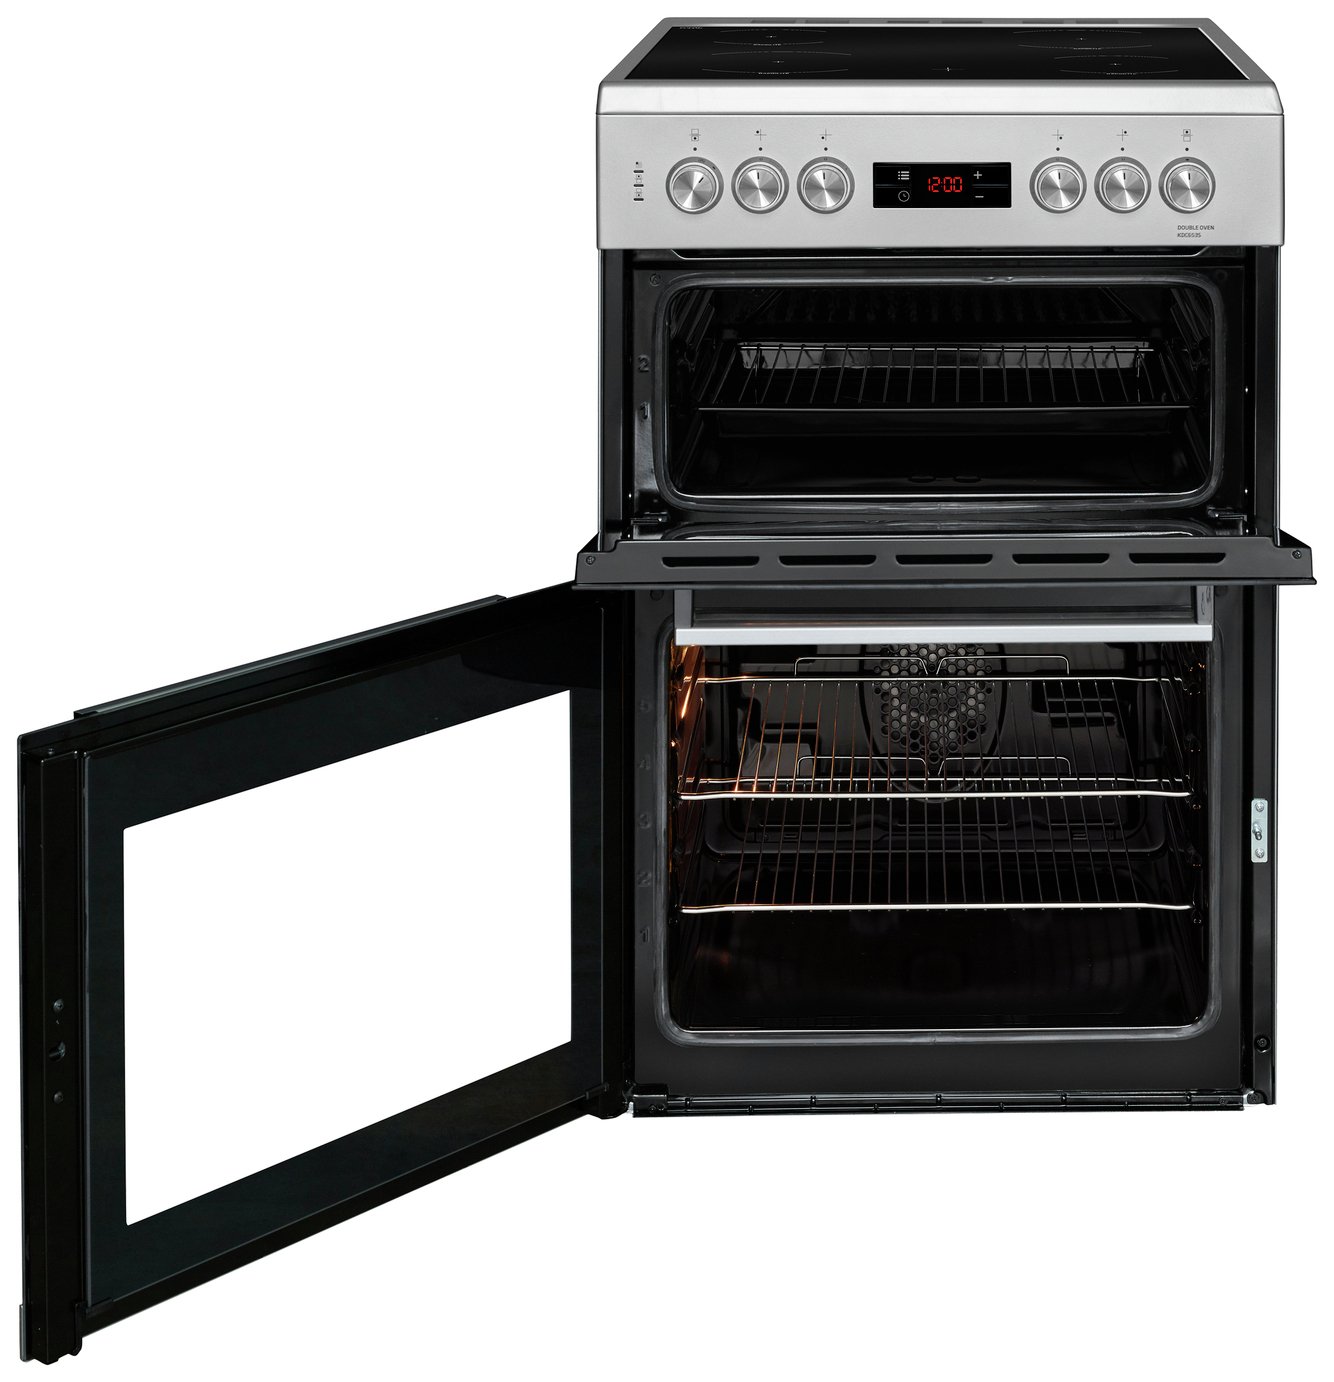 Beko KDC653S 60cm Double Oven Electric Cooker Review